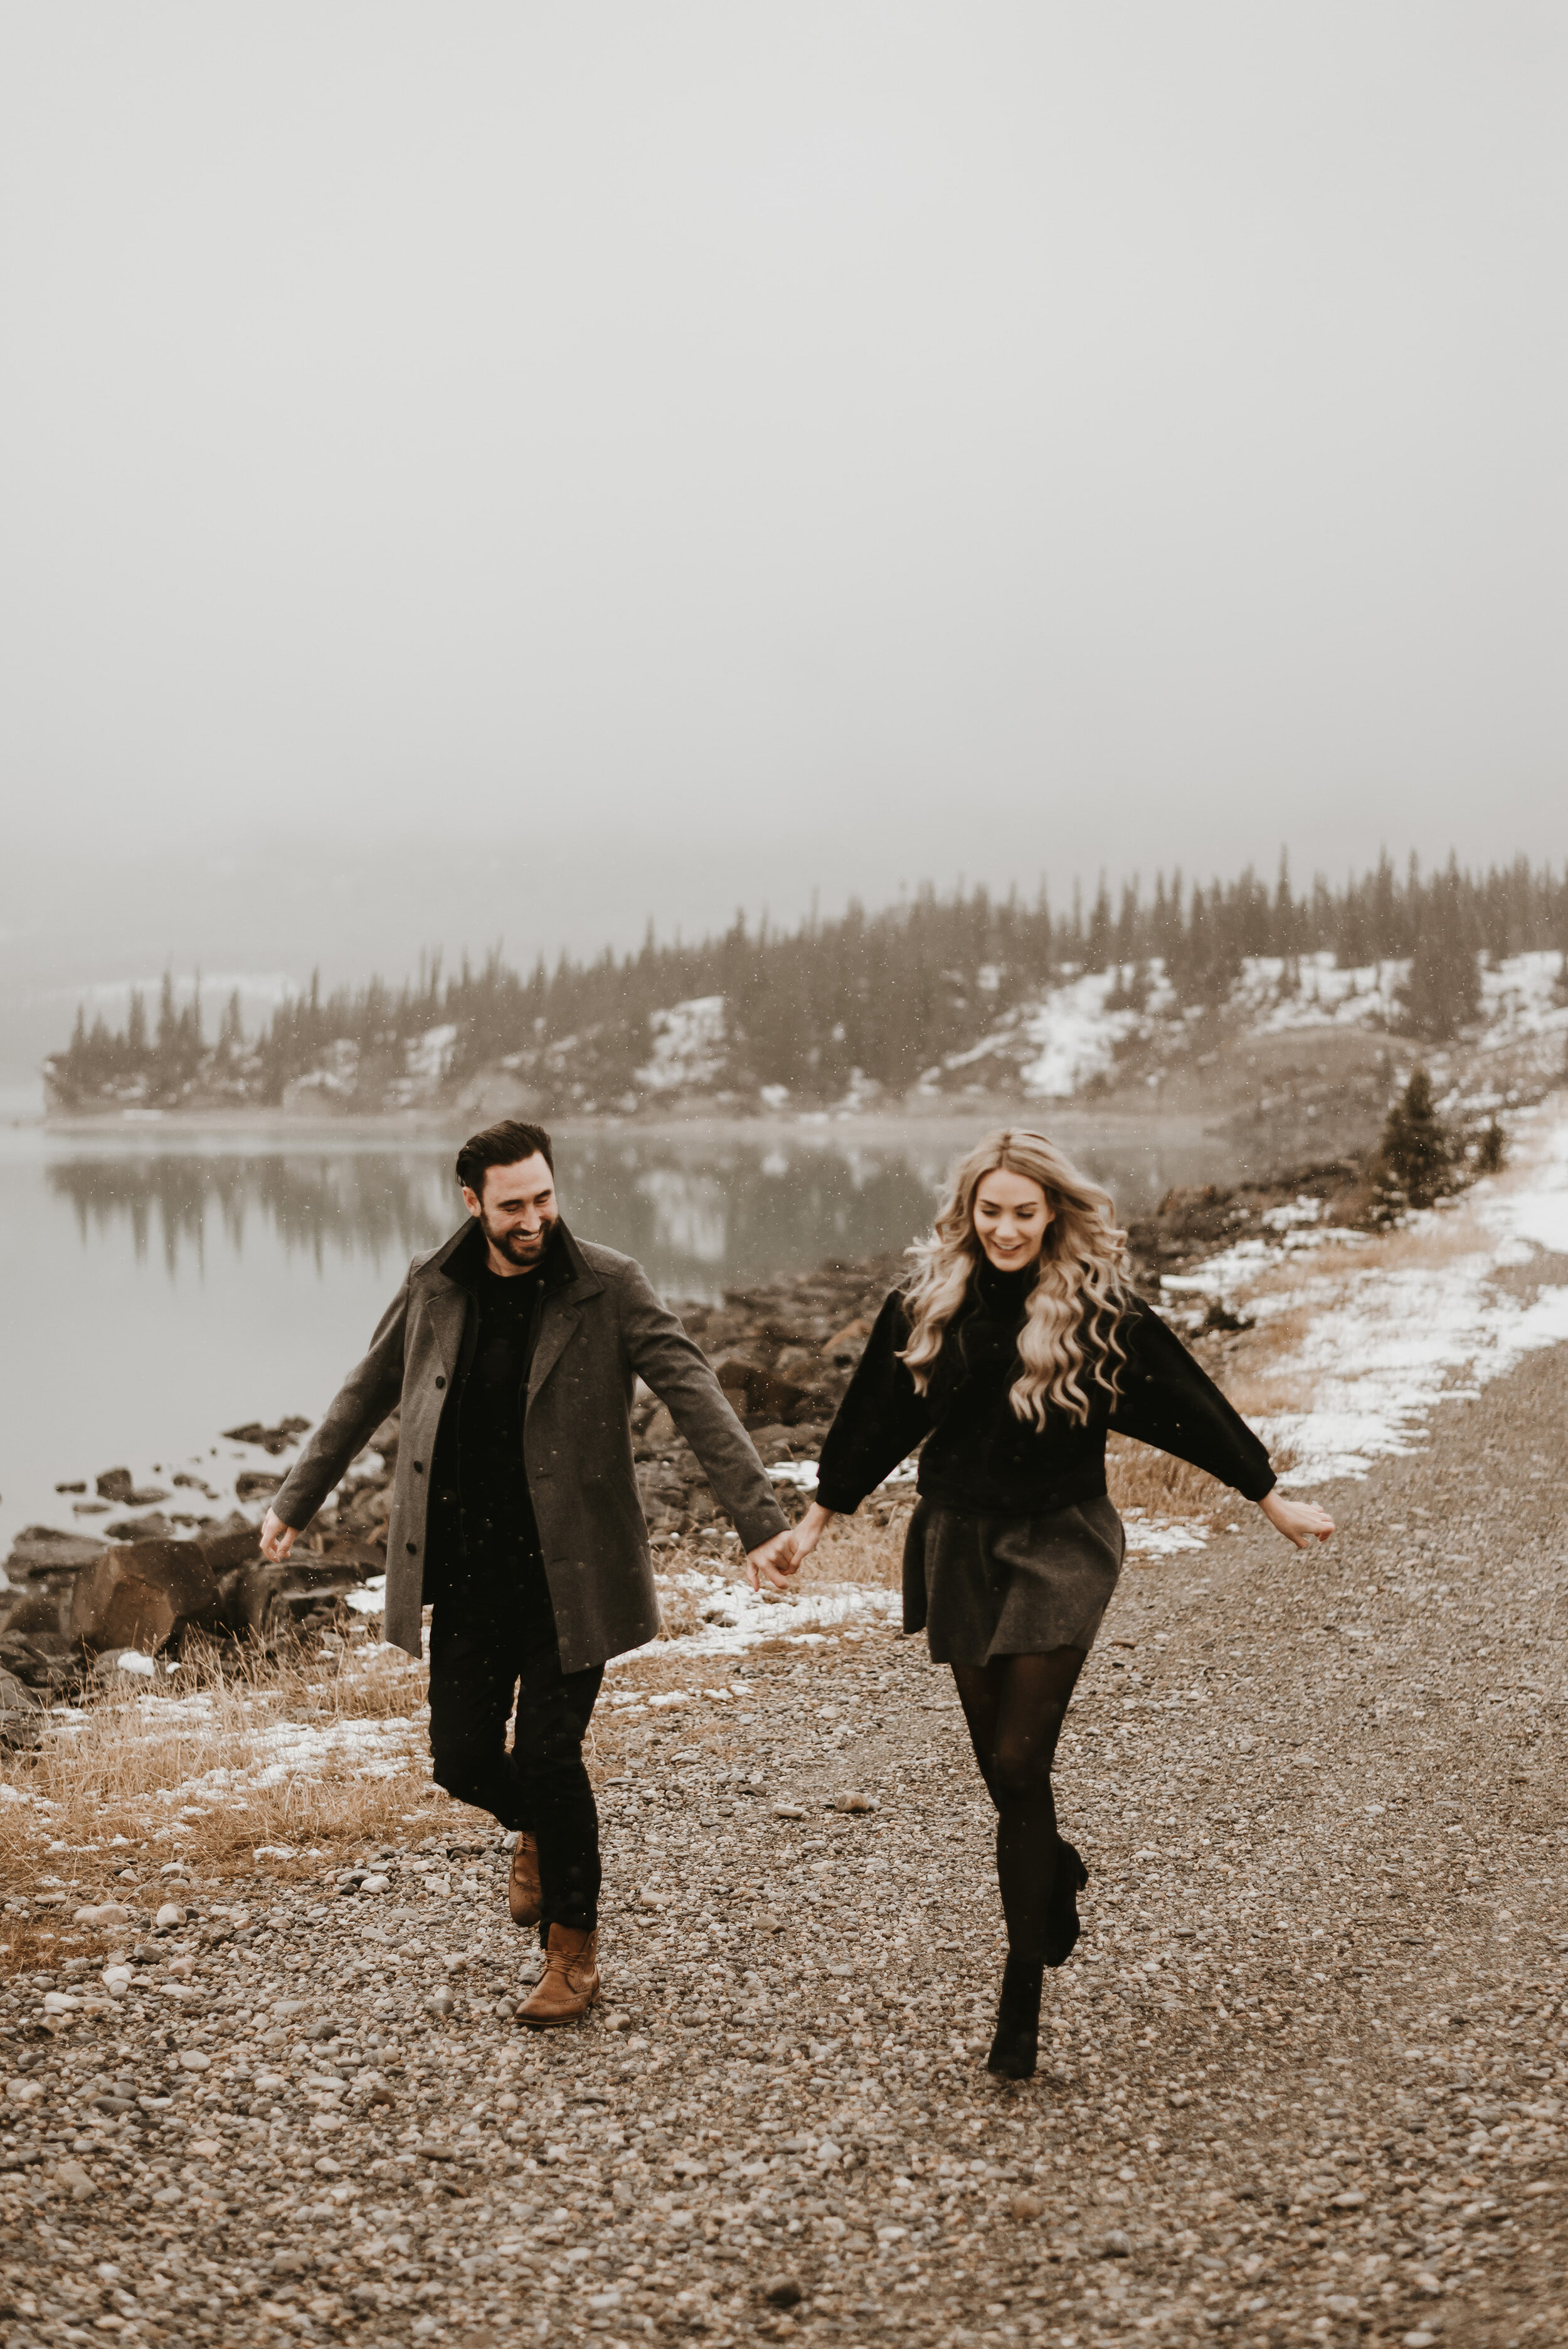 We're Going Crazy Over This Adorably Cozy Winter Engagement Session - on the Bronte Bride Blog